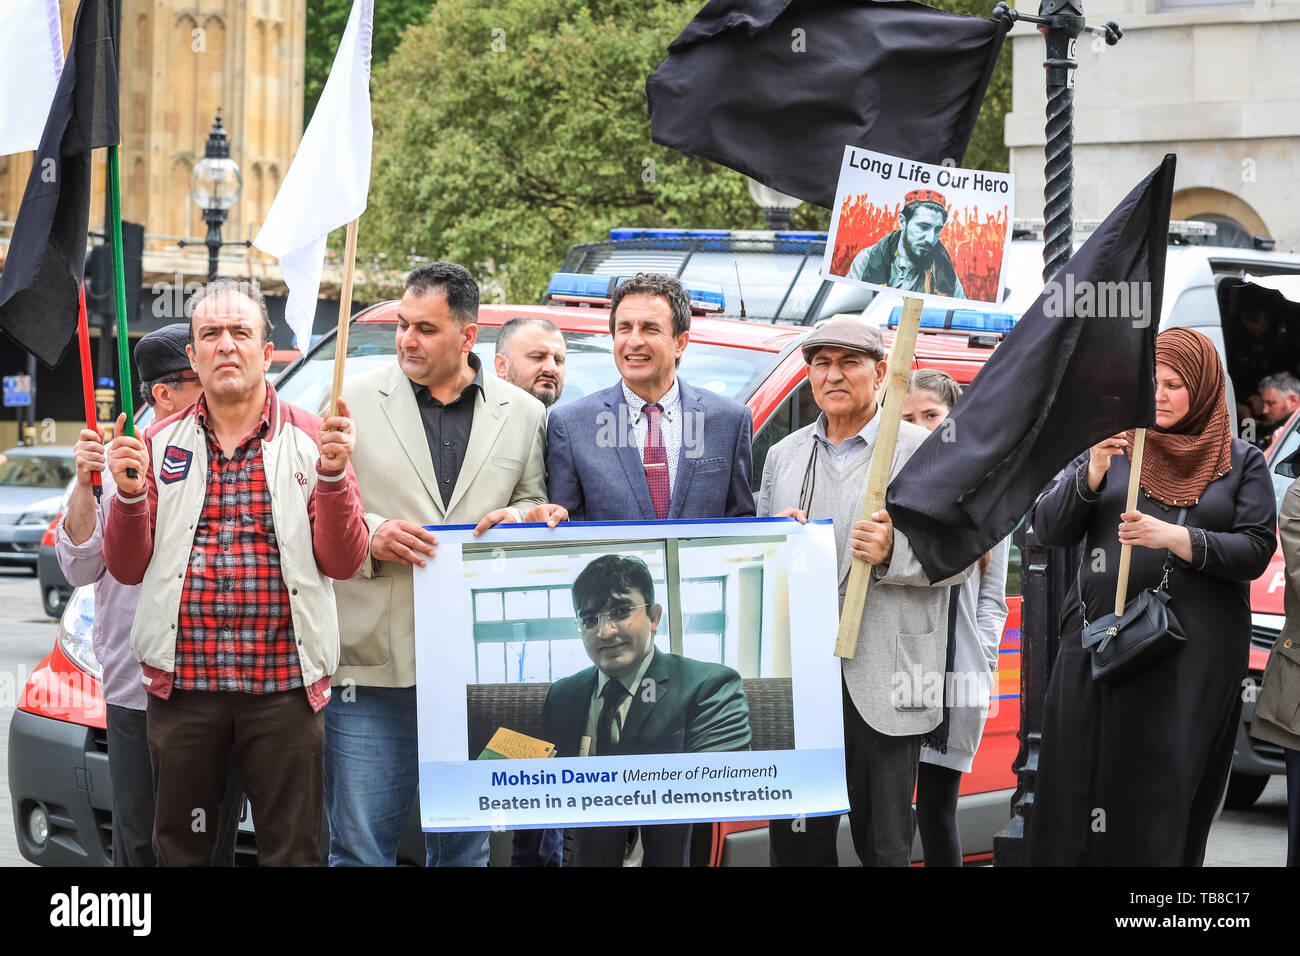 London, UK. 30th May, 2019. Protesters affiliated to the Pashtun Tahafuz Movement (PTM), many of the wearing Pashteen hats and traditional clothing, shout and protest against alleged violence and torture by Pakistani military and state forces against Pashtuns. Many Pashtuns are ethnic Afghans, living in Pakistan and Afghanistan. Credit: Imageplotter/Alamy Live News Stock Photo